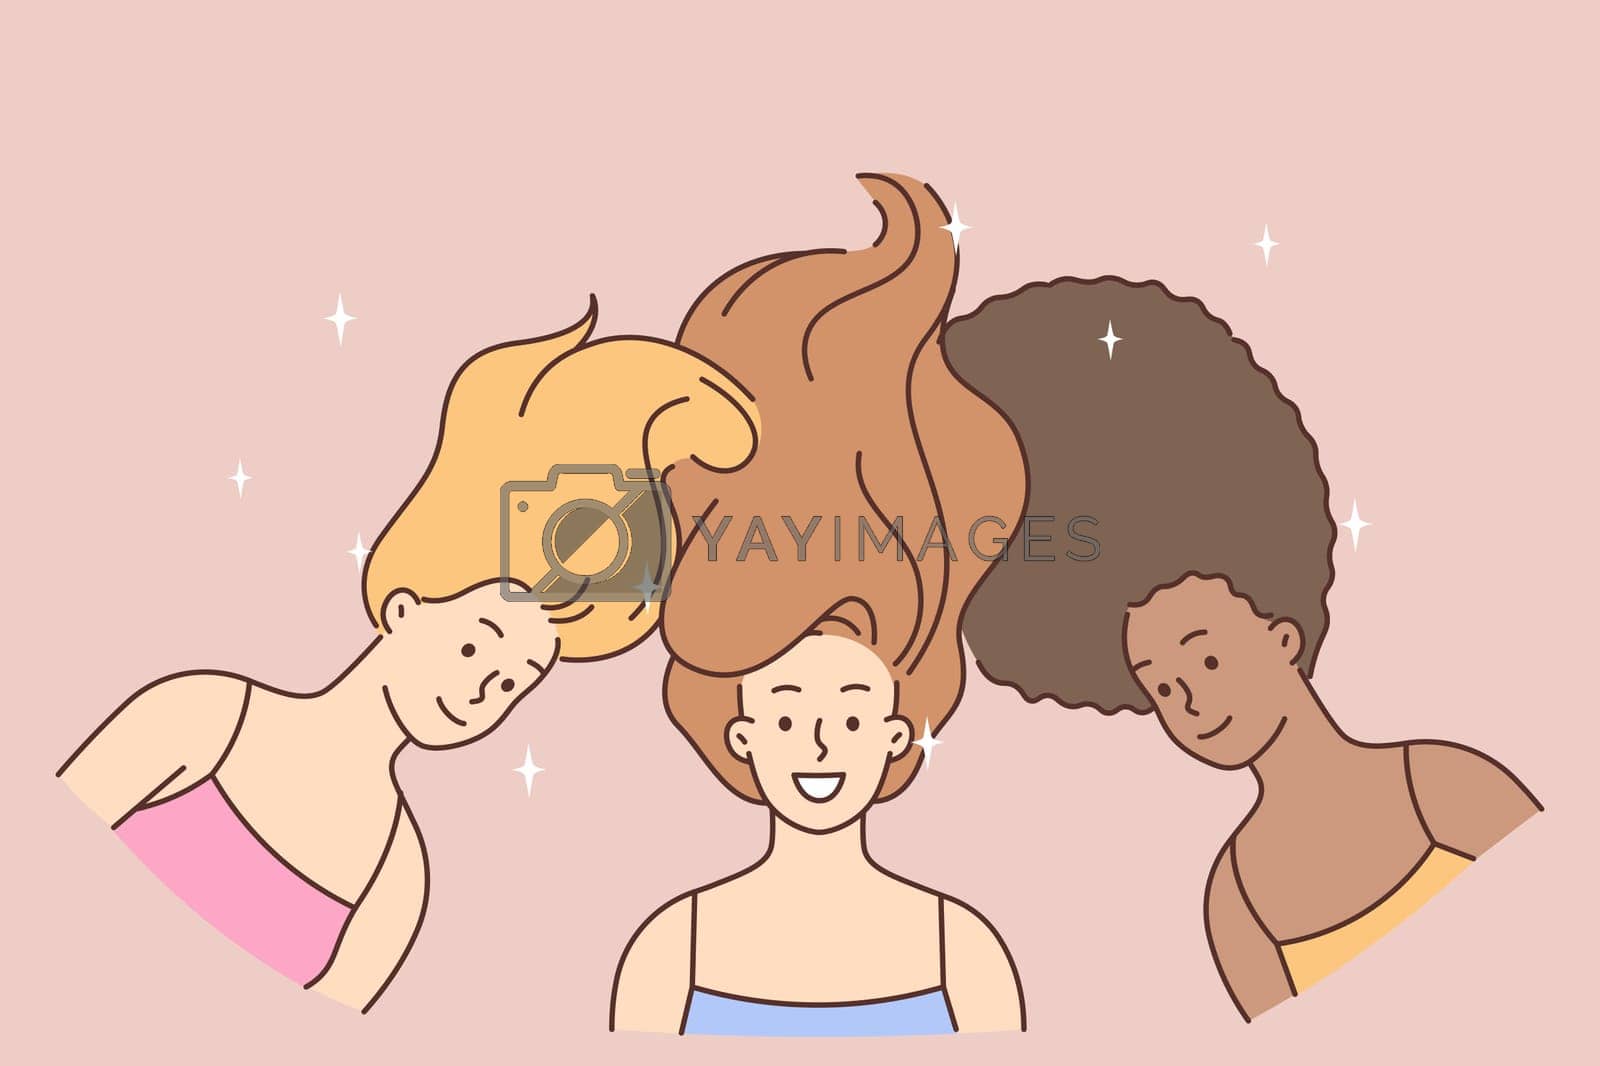 Royalty free image of Smiling diverse women show interracial beauty by Vasilyeu